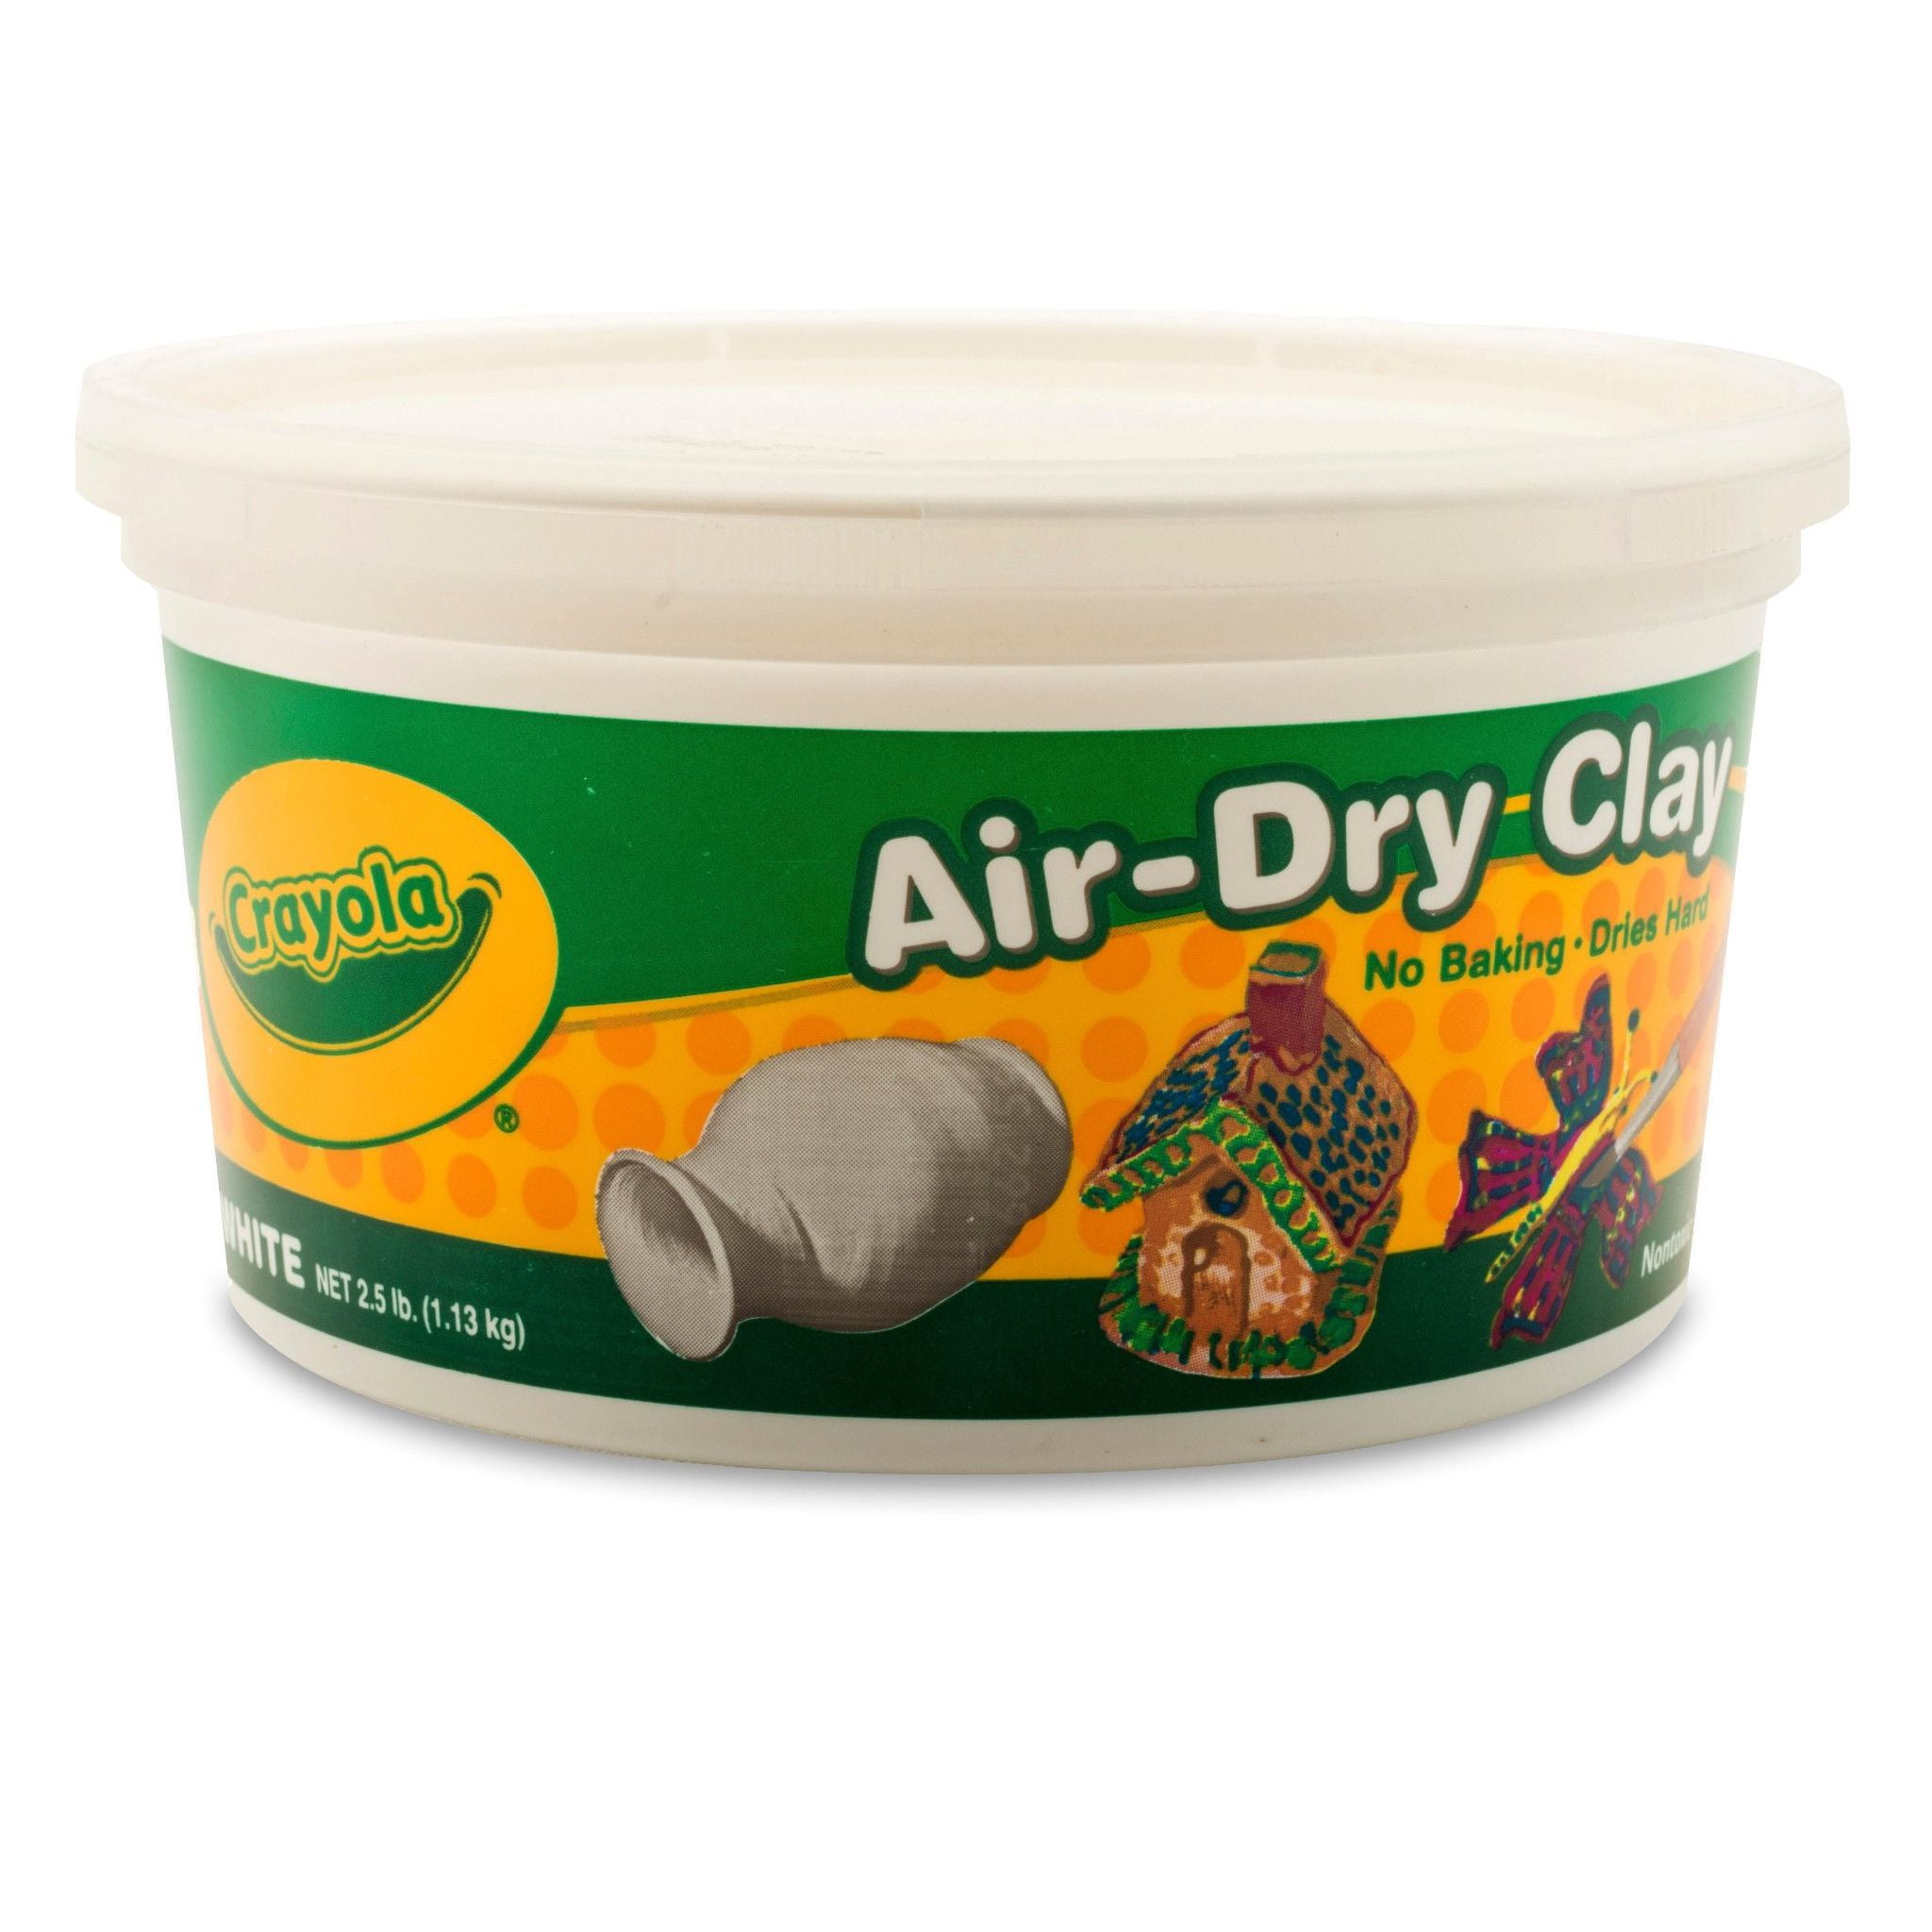 Crayola Air-Dry Clay Bucket, White, Tactile Art for Kids, Easter Crafts, Basket Stuffers